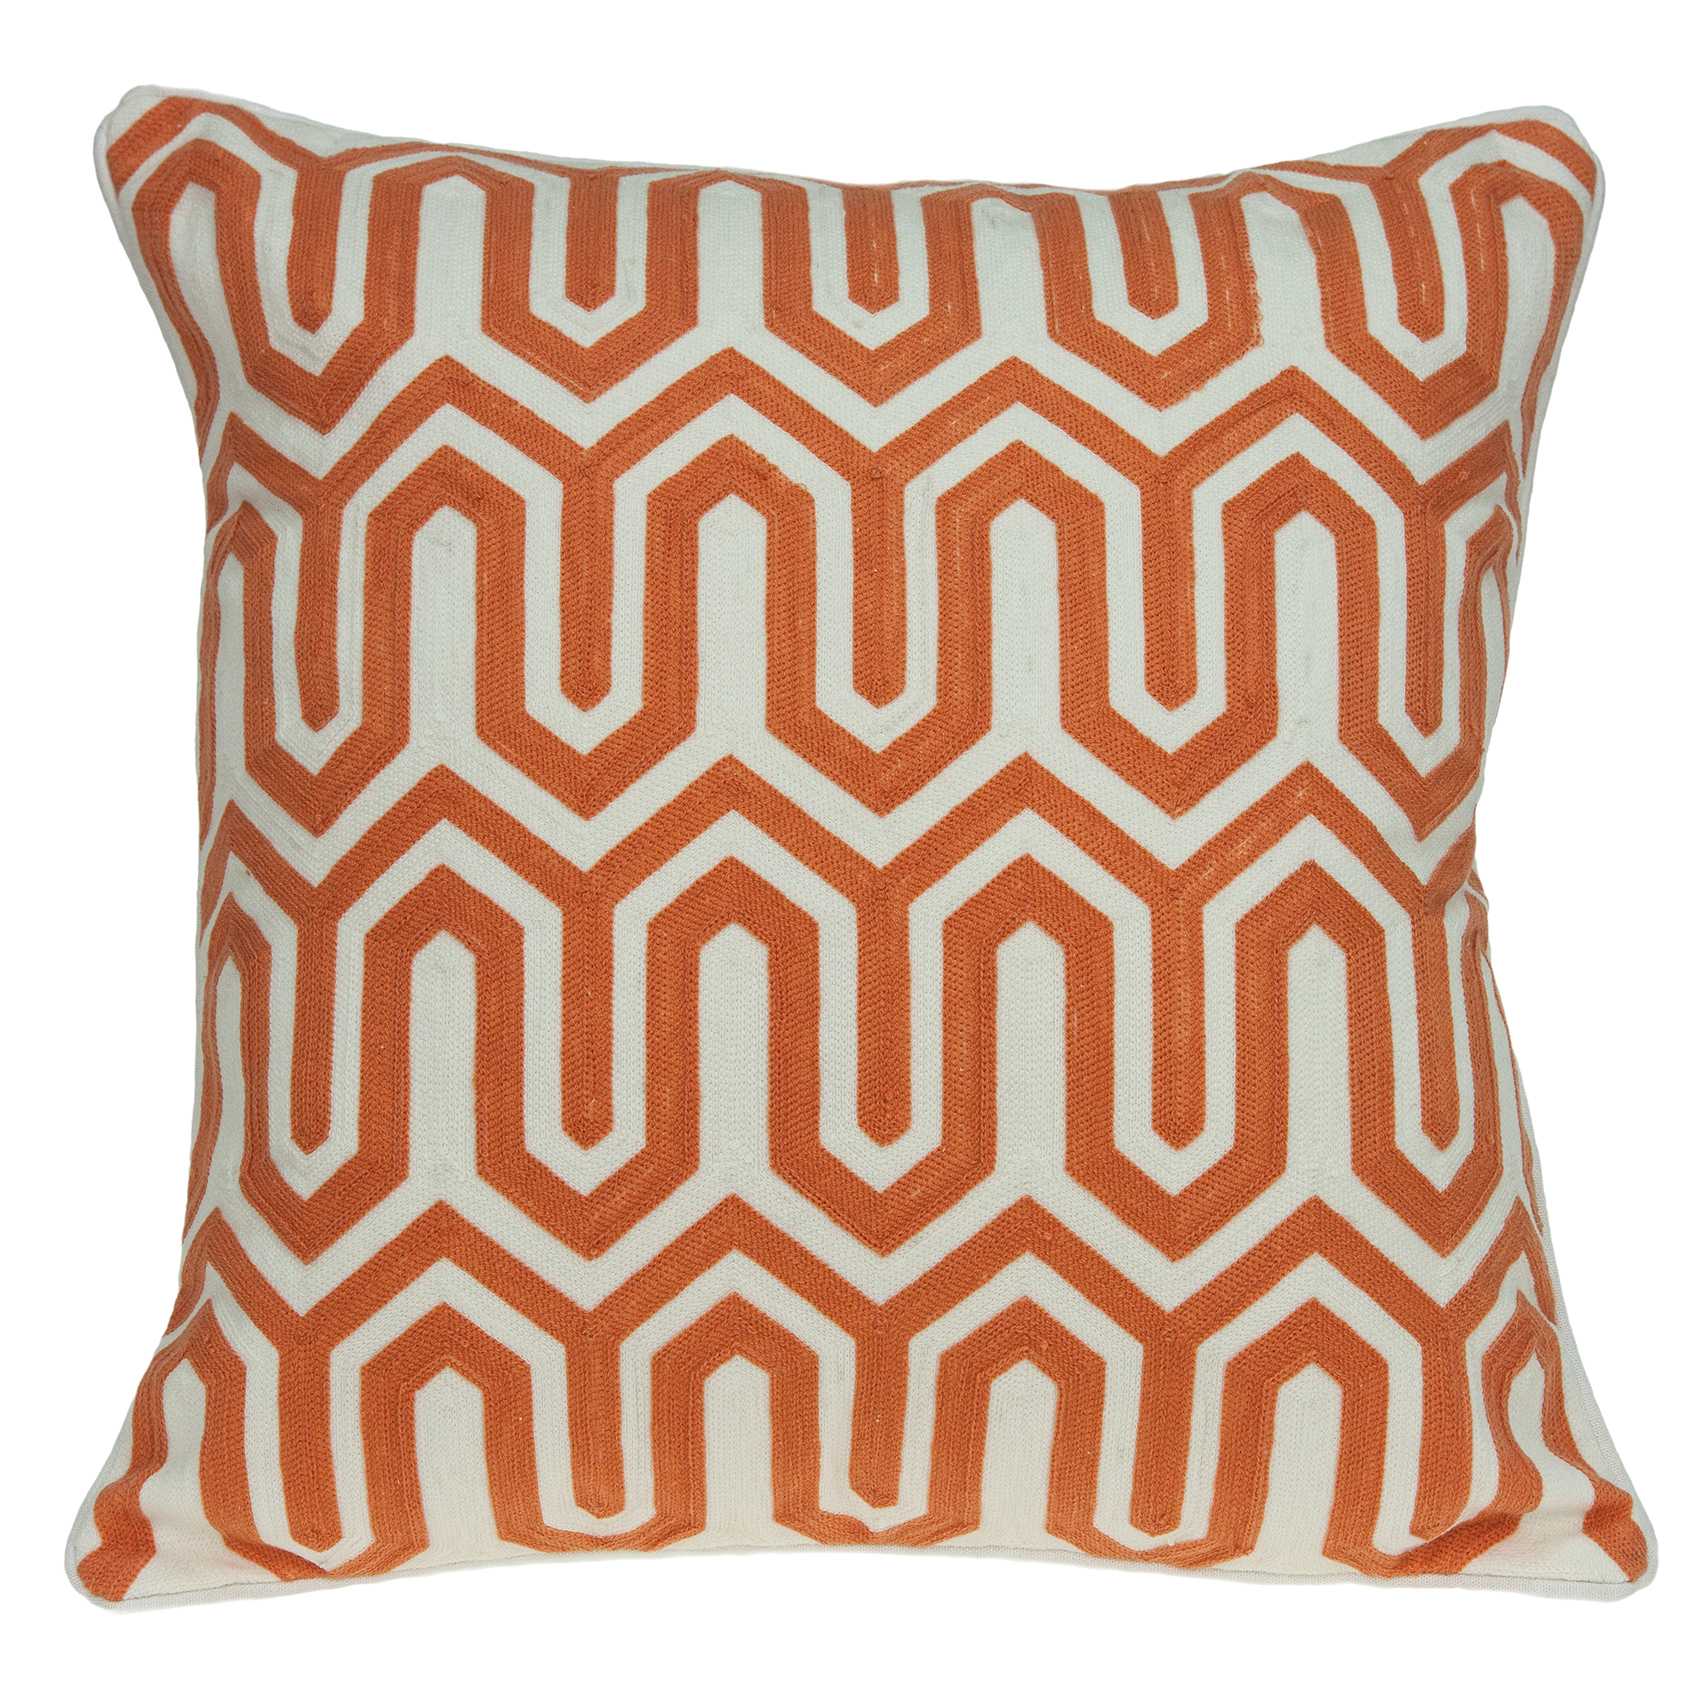 20" x 0.5" x 20" Transitional Orange Pillow Cover